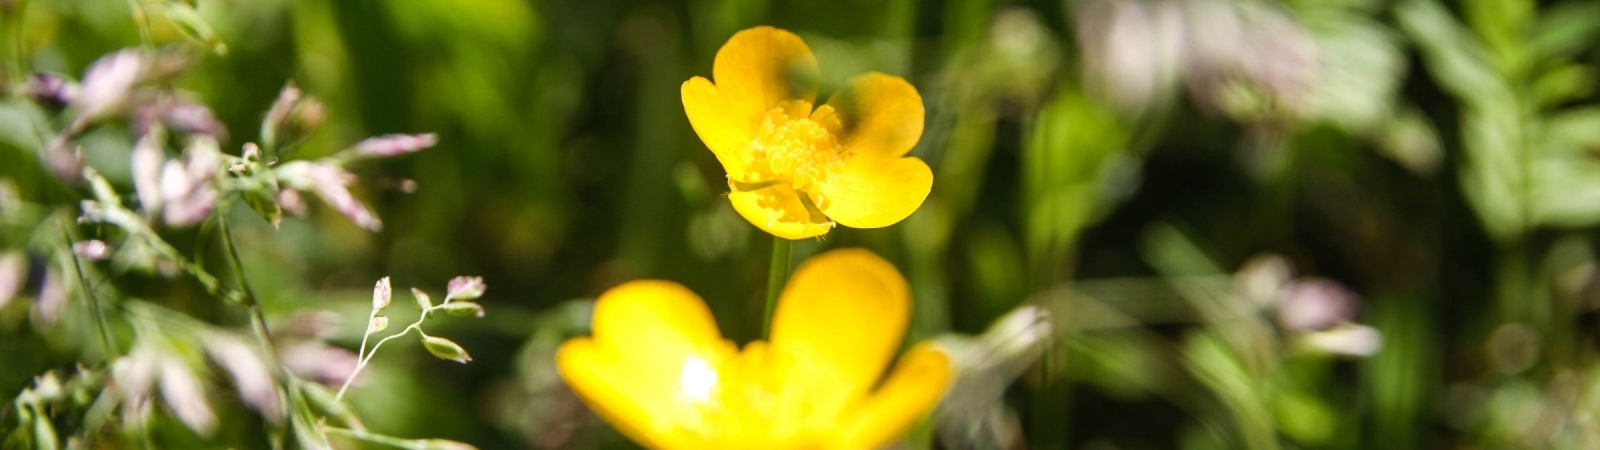 yellow flowers surrounded by green grass